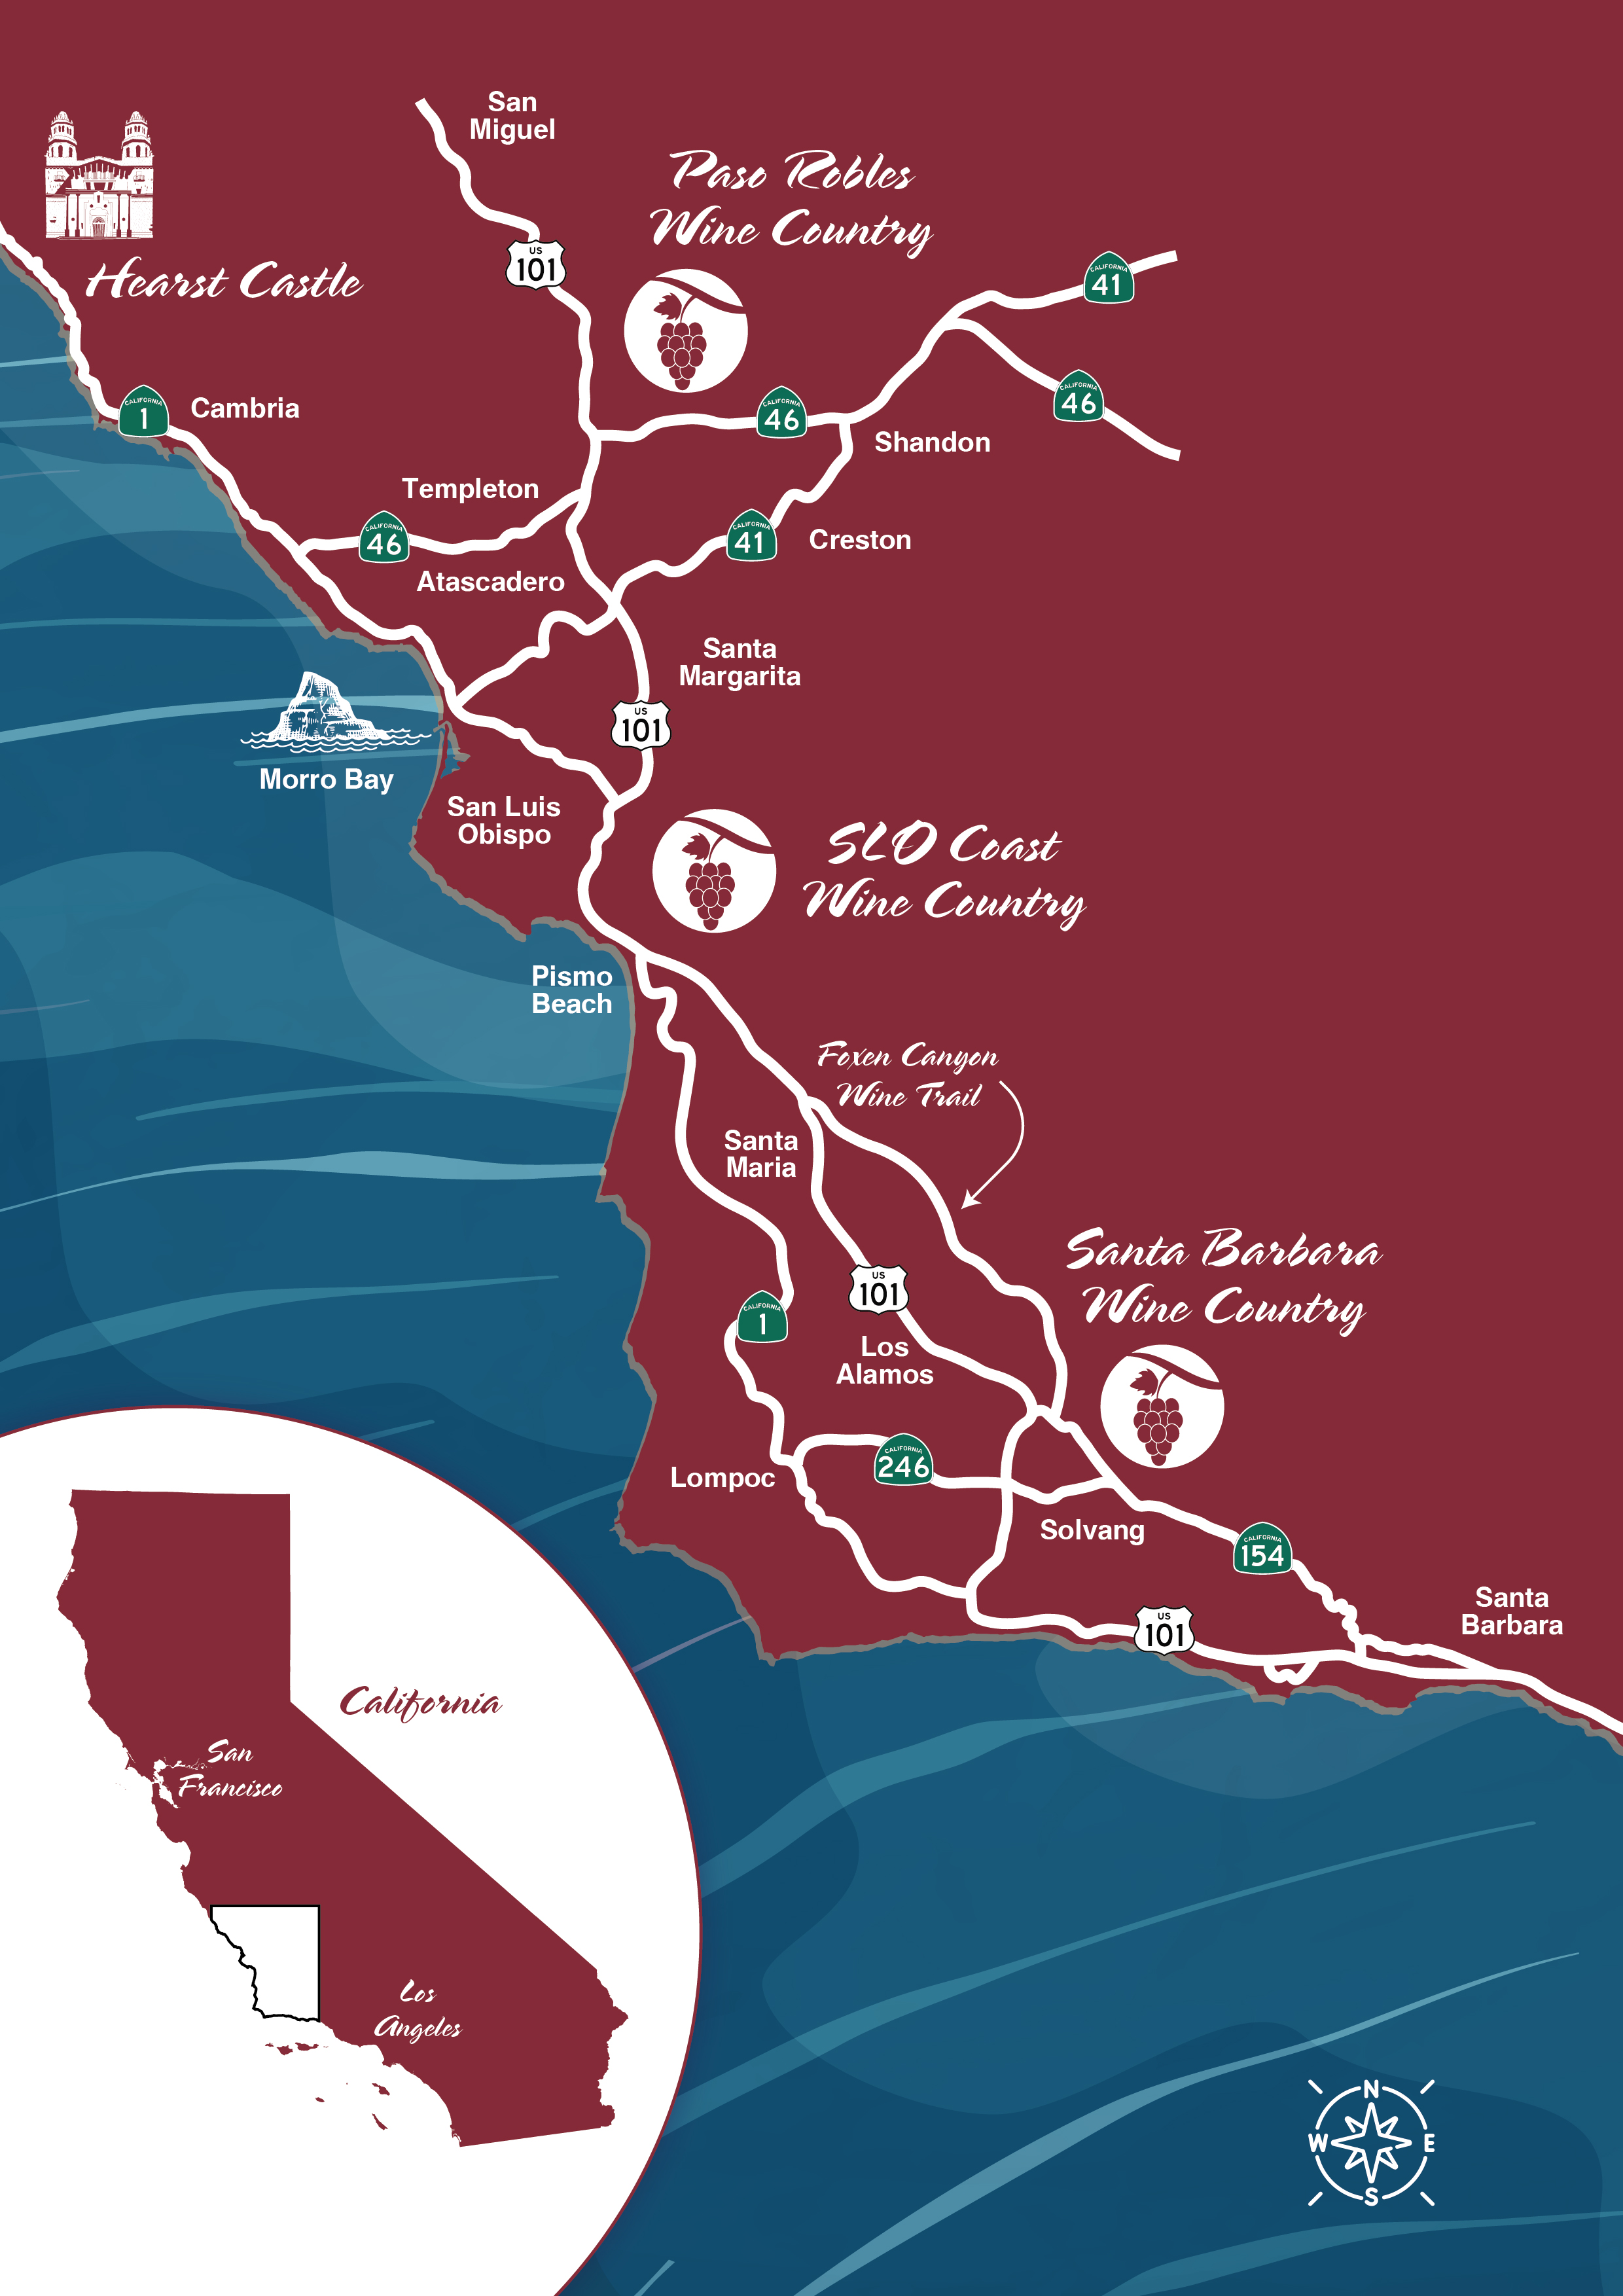 Wine regions of the Central Coast of California, from Paso Robles to Santa Barbara including Hearst Castle